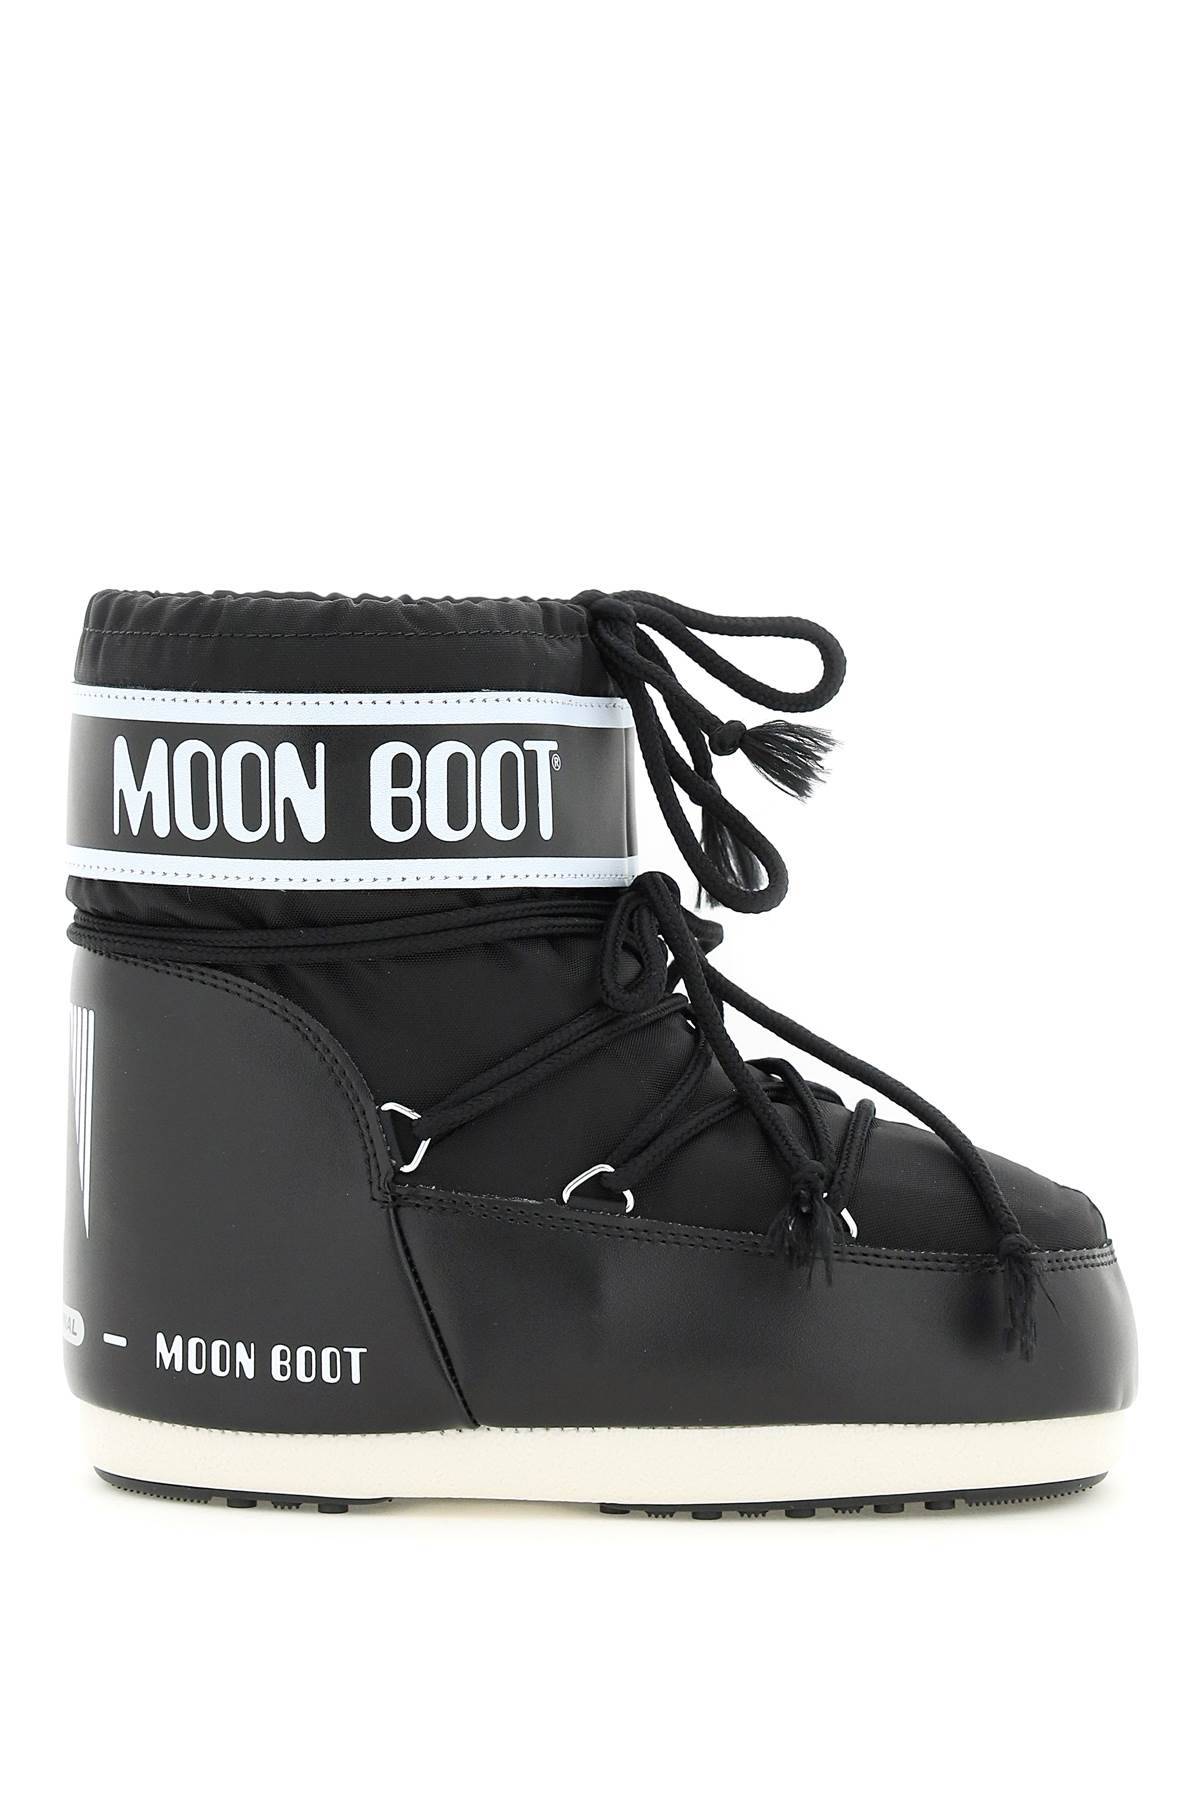 Moon Boot MOON BOOT icon low apres-ski boots